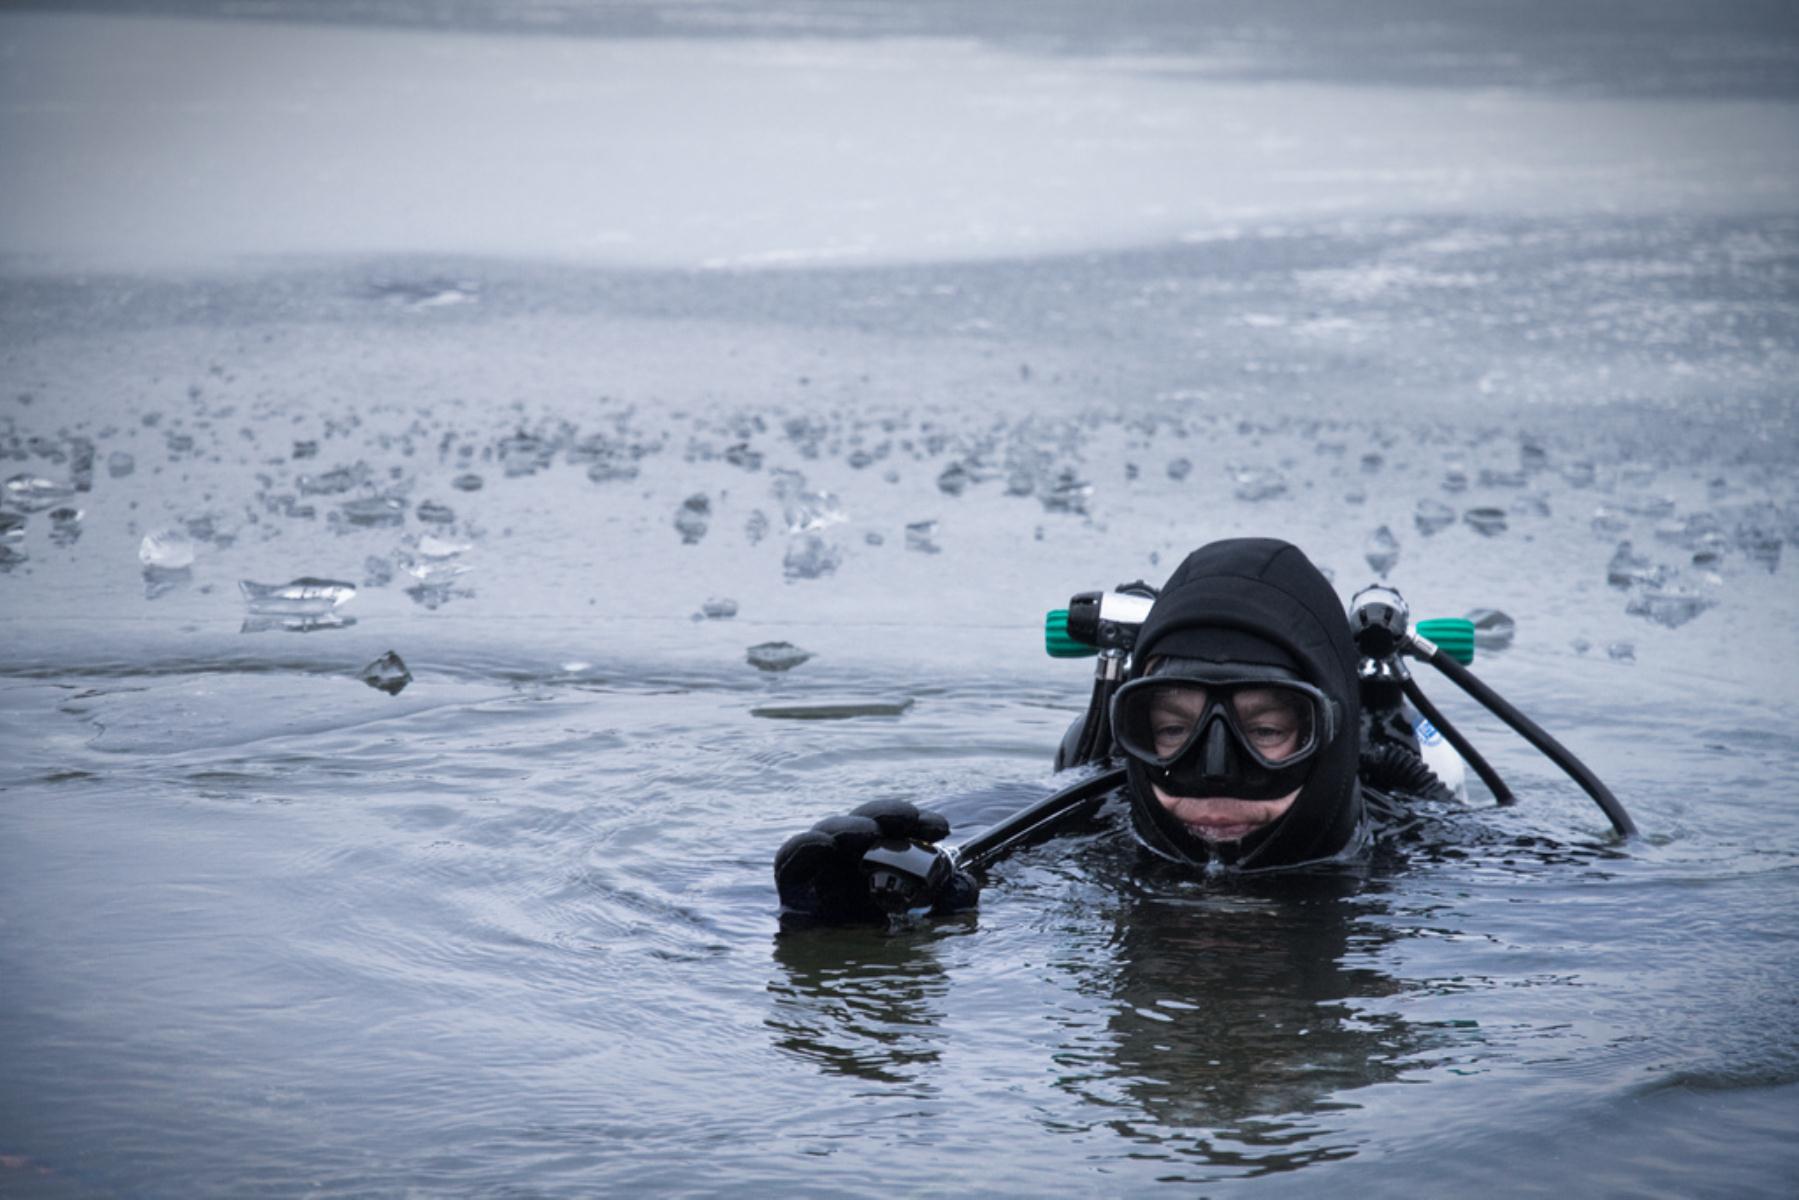 Diver preparing to drop beneath the surface in an icy lake